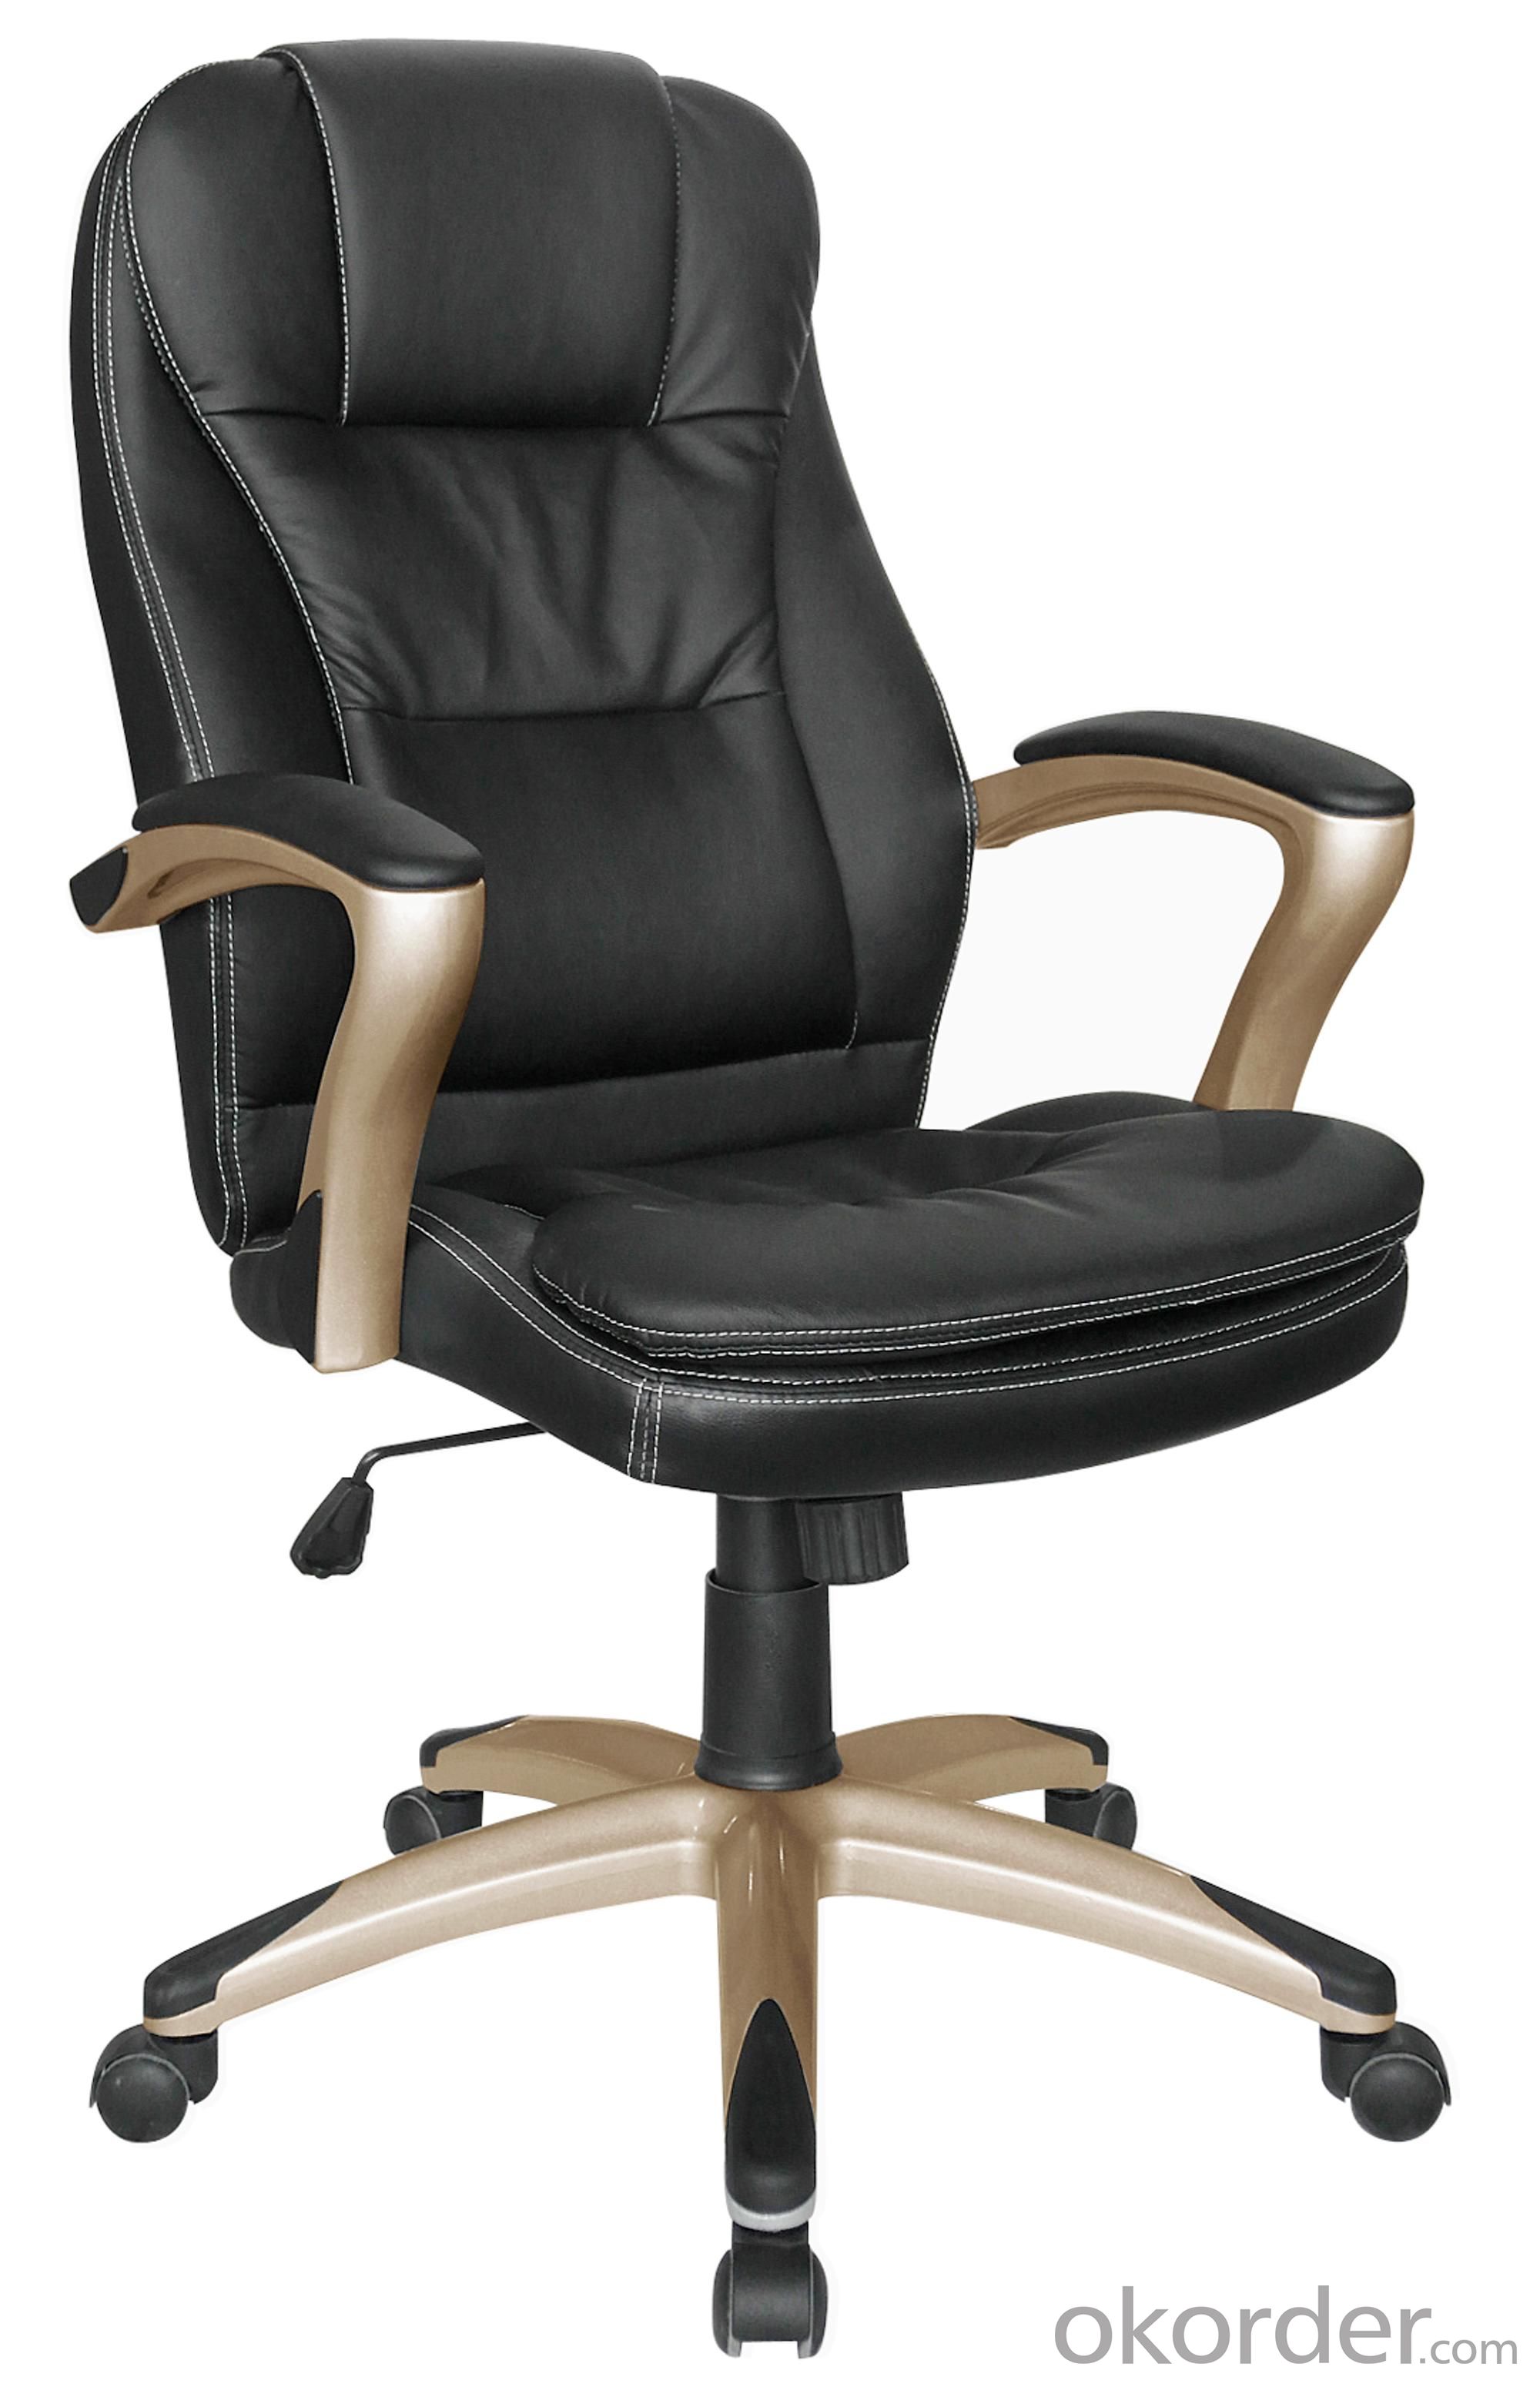 Model Style Hot Selling High Quality PU Front PVC Coating Armrest Office Chair